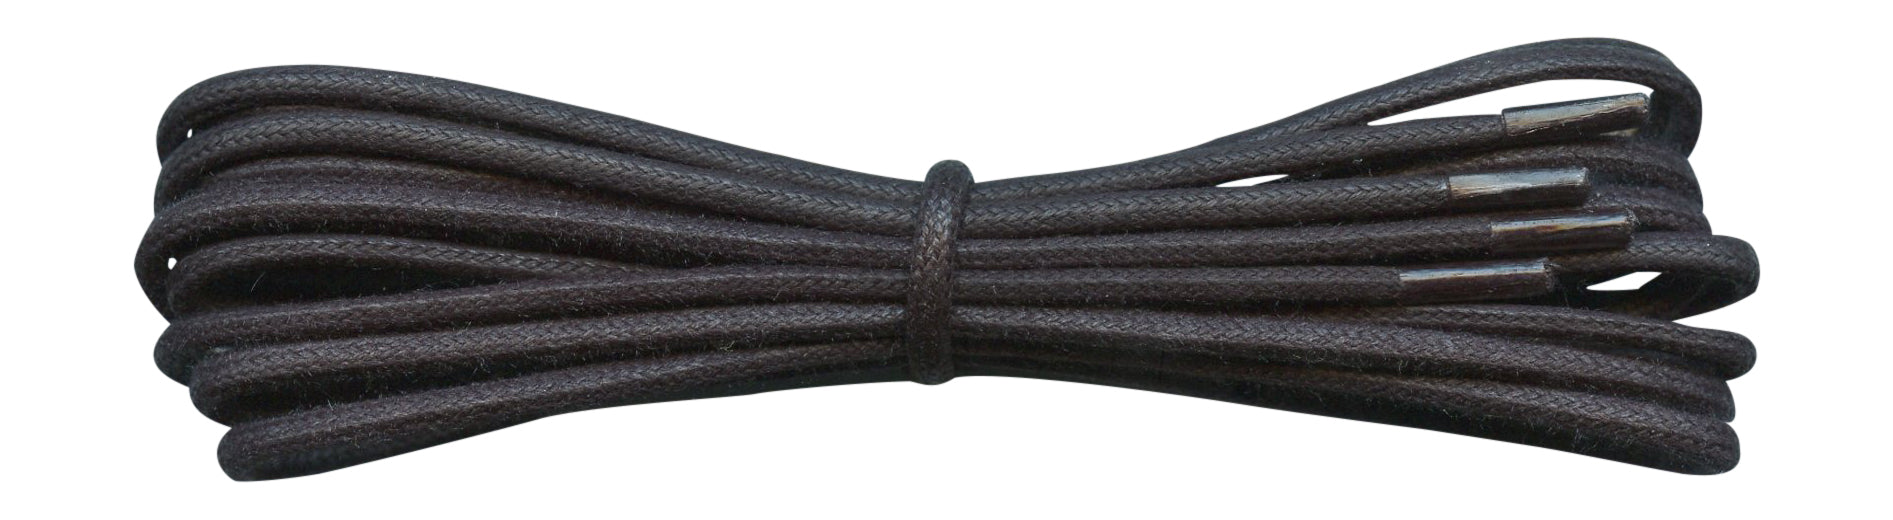 Fabmania black 2 mm round waxed cotton shoe laces